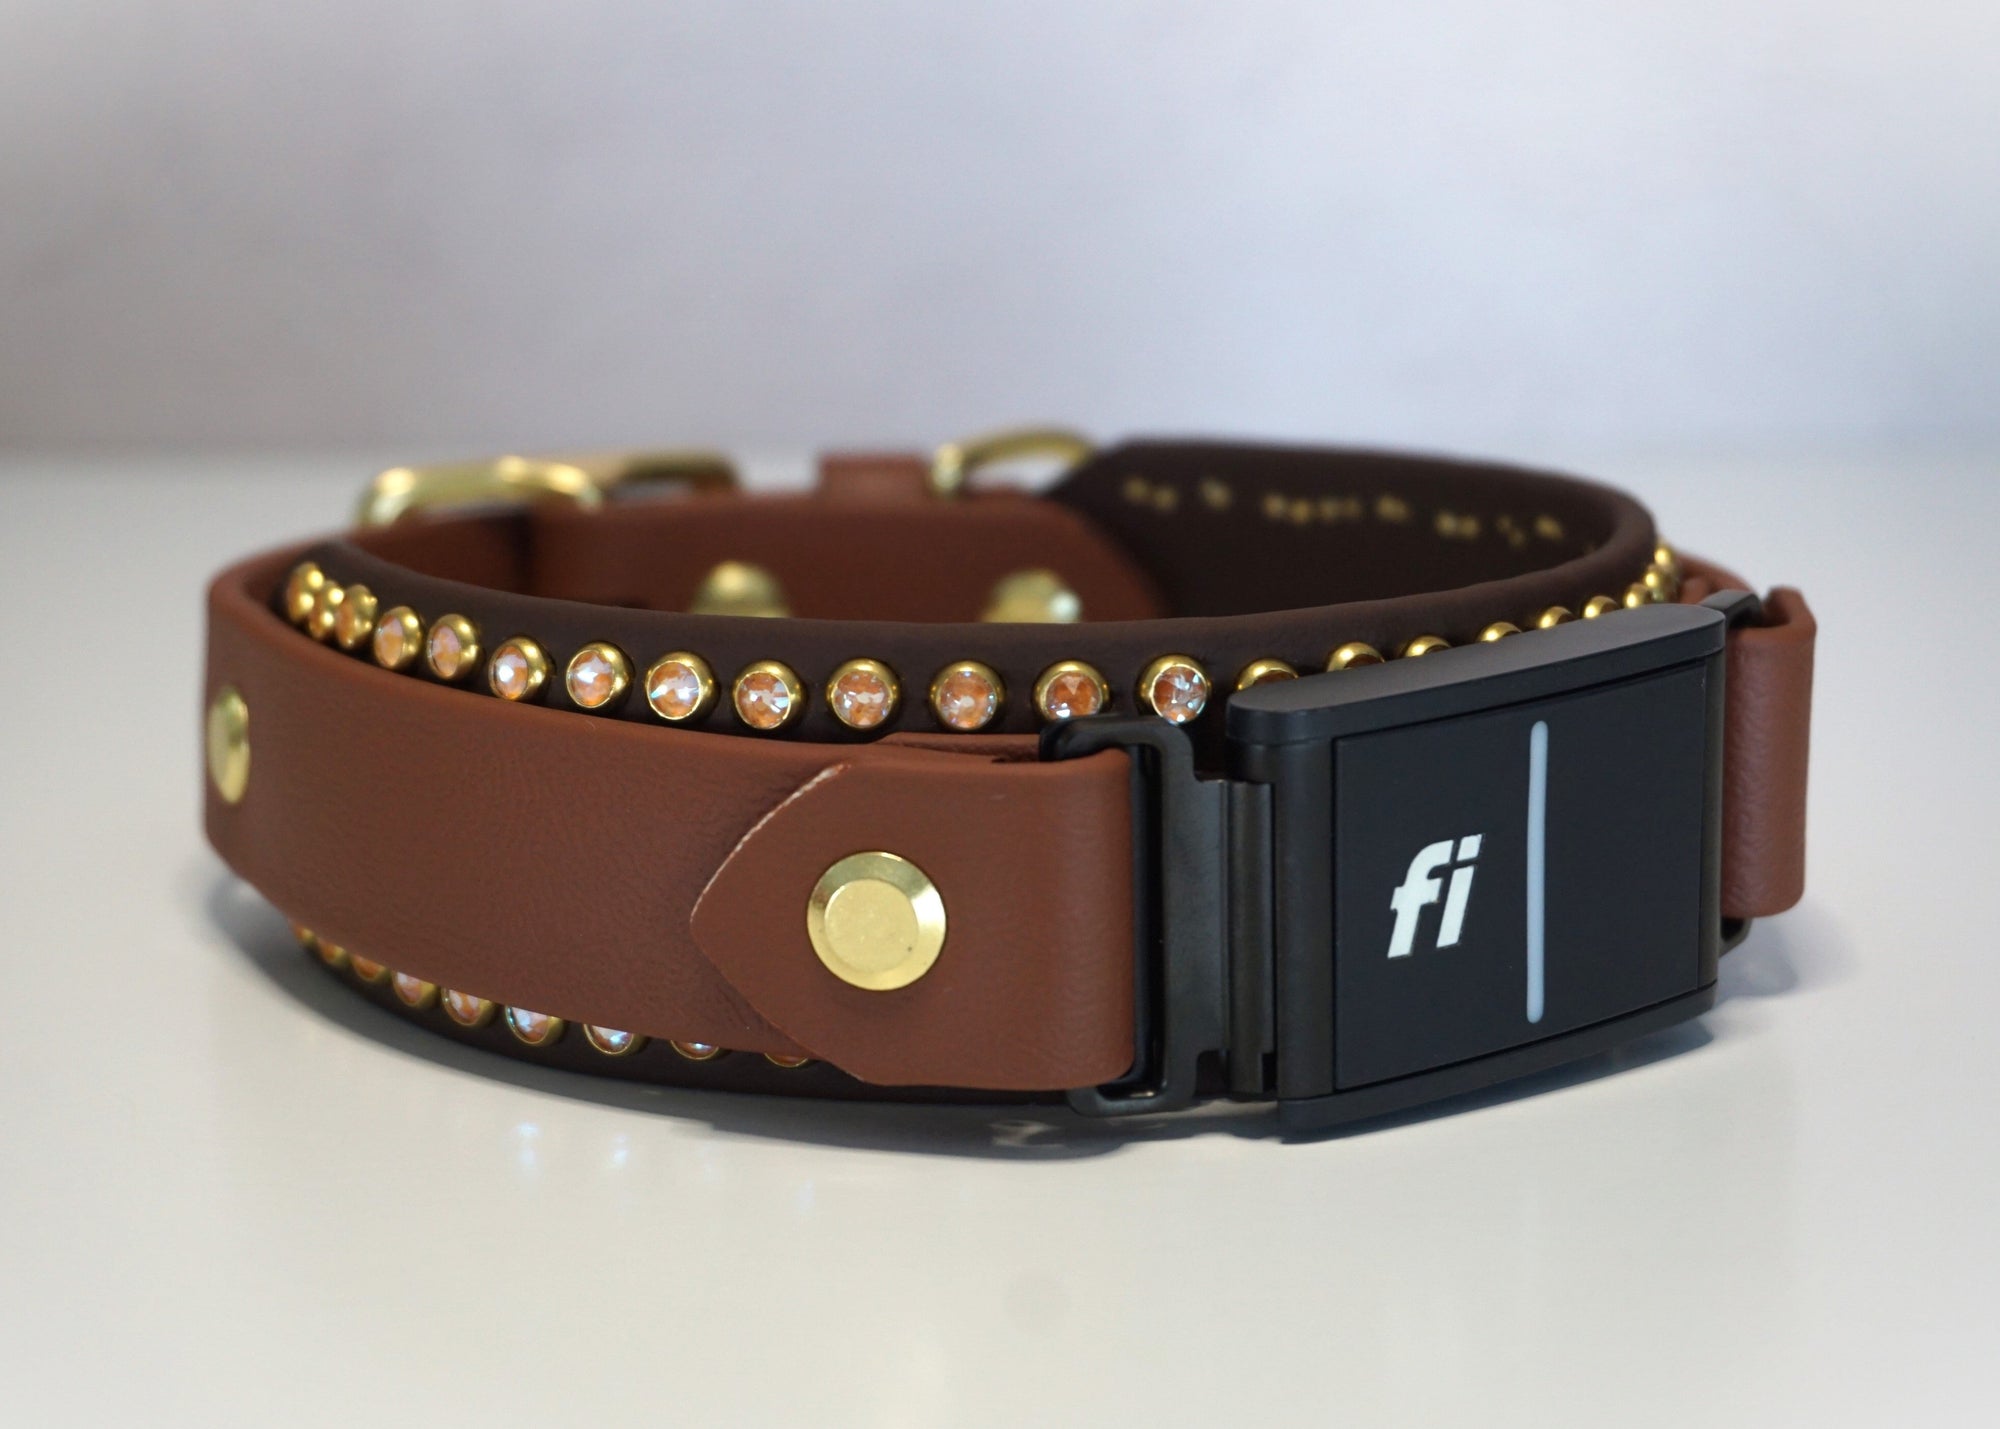 Fi compatible crystal studded Lennon collar in Chestnut and dark brown waterproof webbing with Peach Delight Swarovski crystals